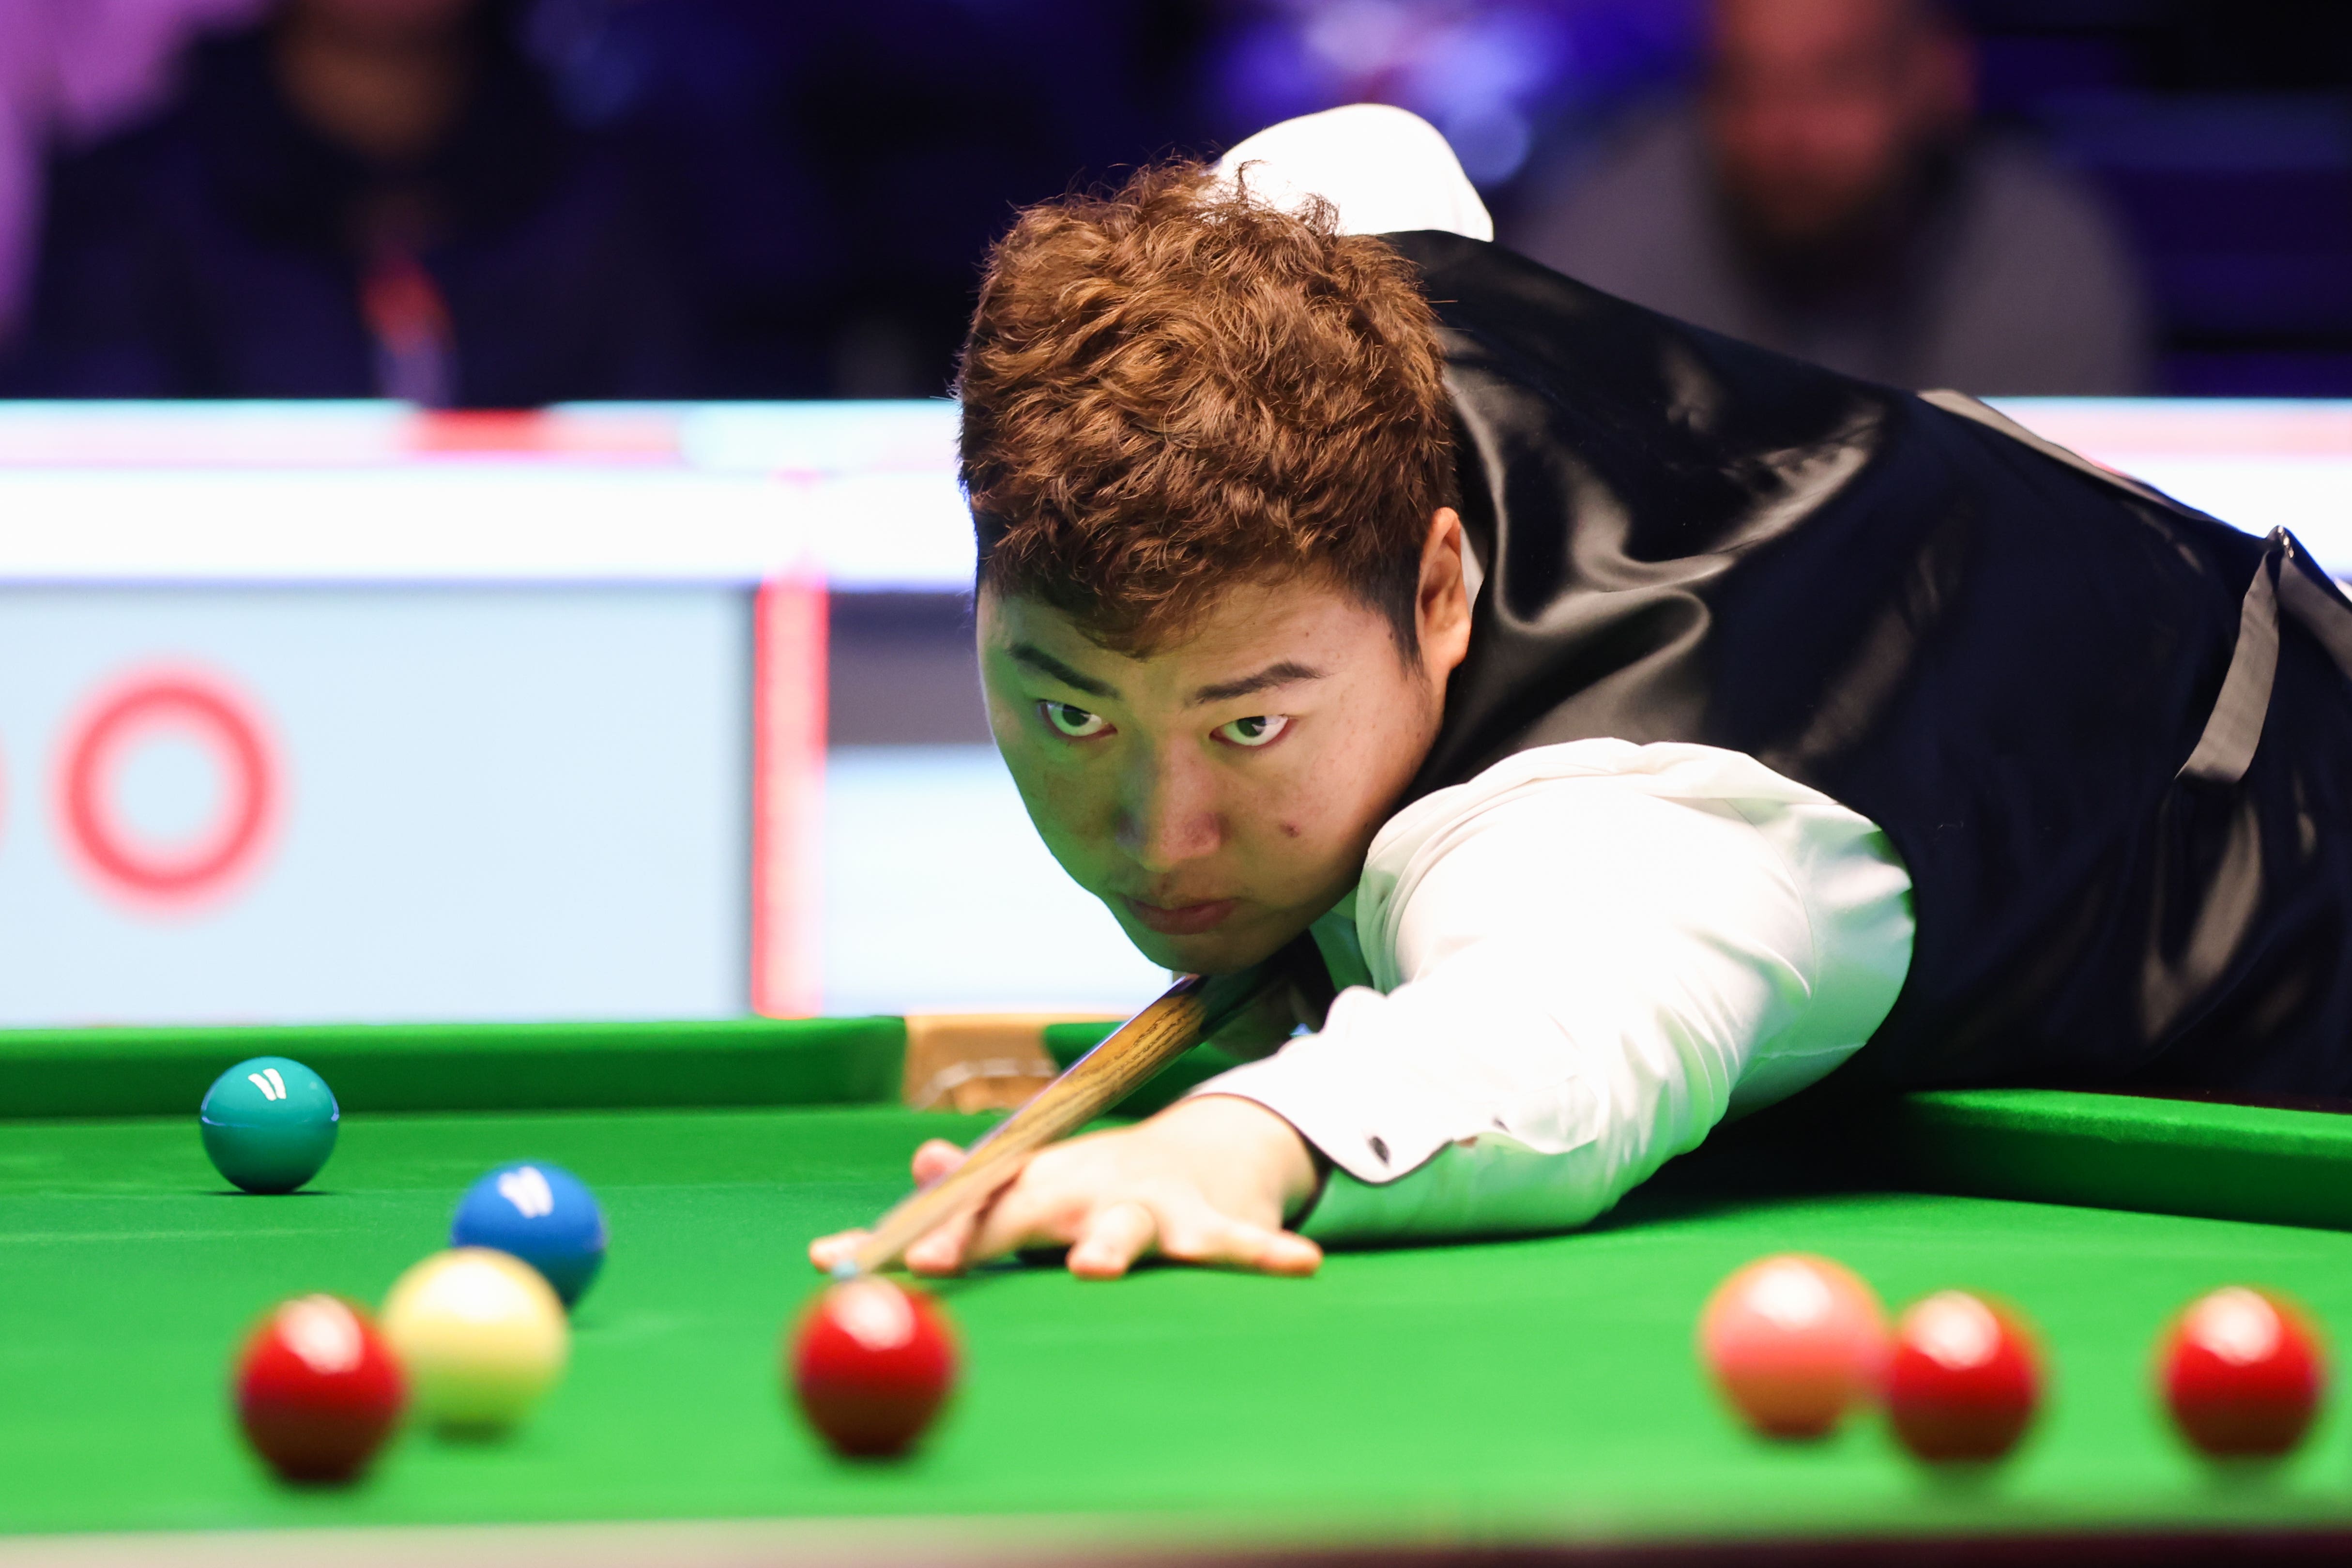 Yan Bingtao suspended from World Snooker Tour amid match-fixing investigation The Independent